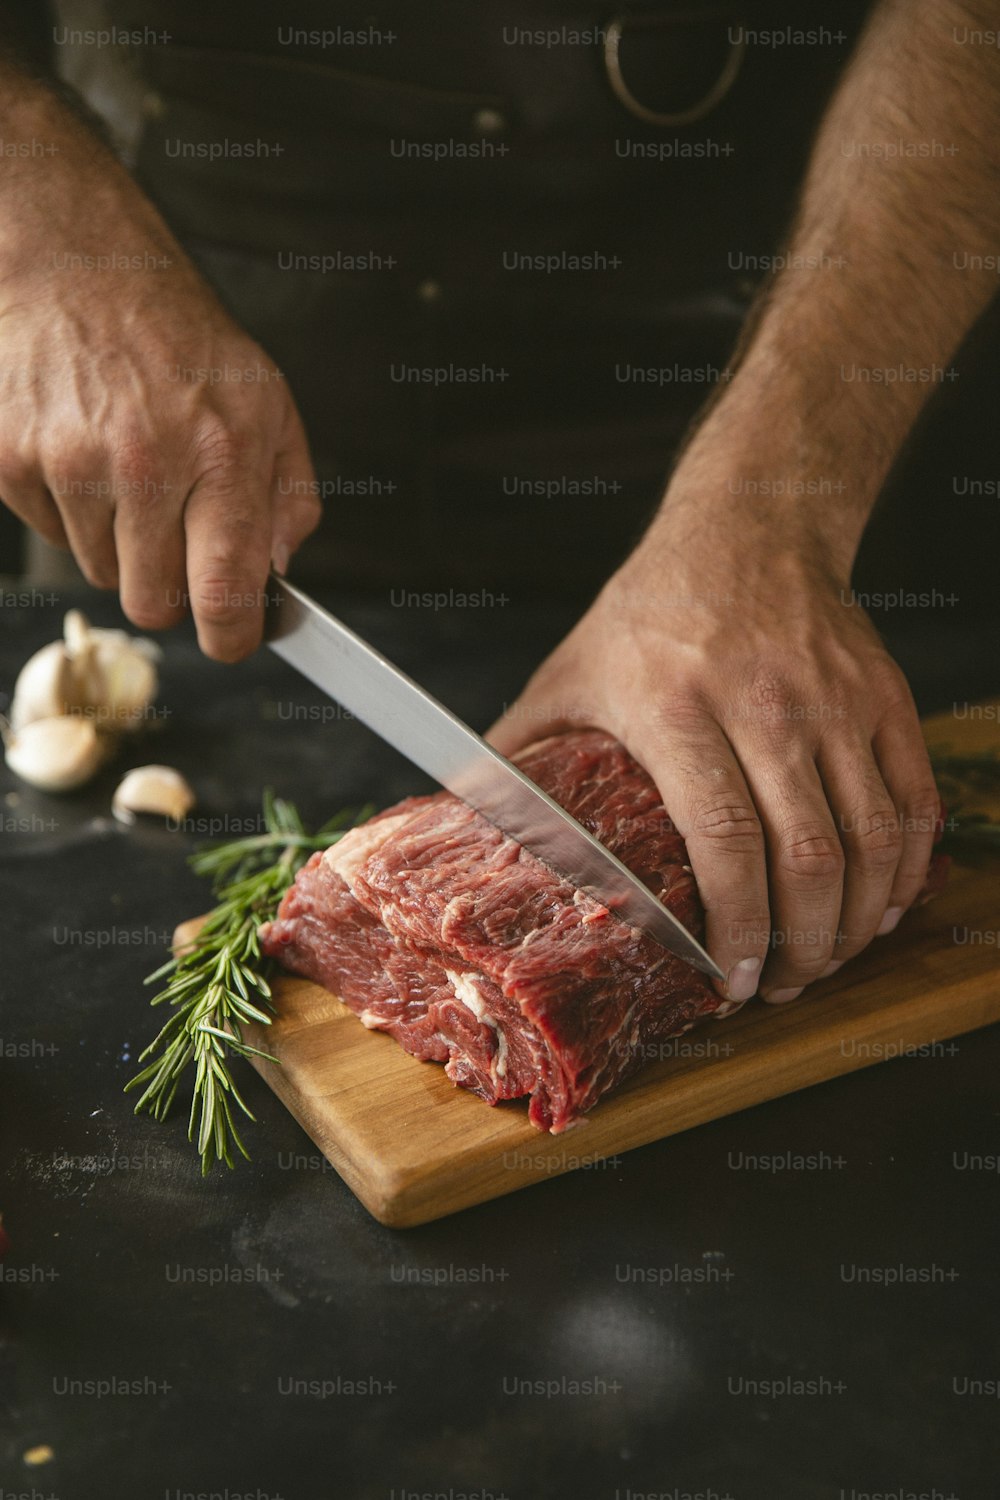 a man cutting up a piece of meat on a cutting board